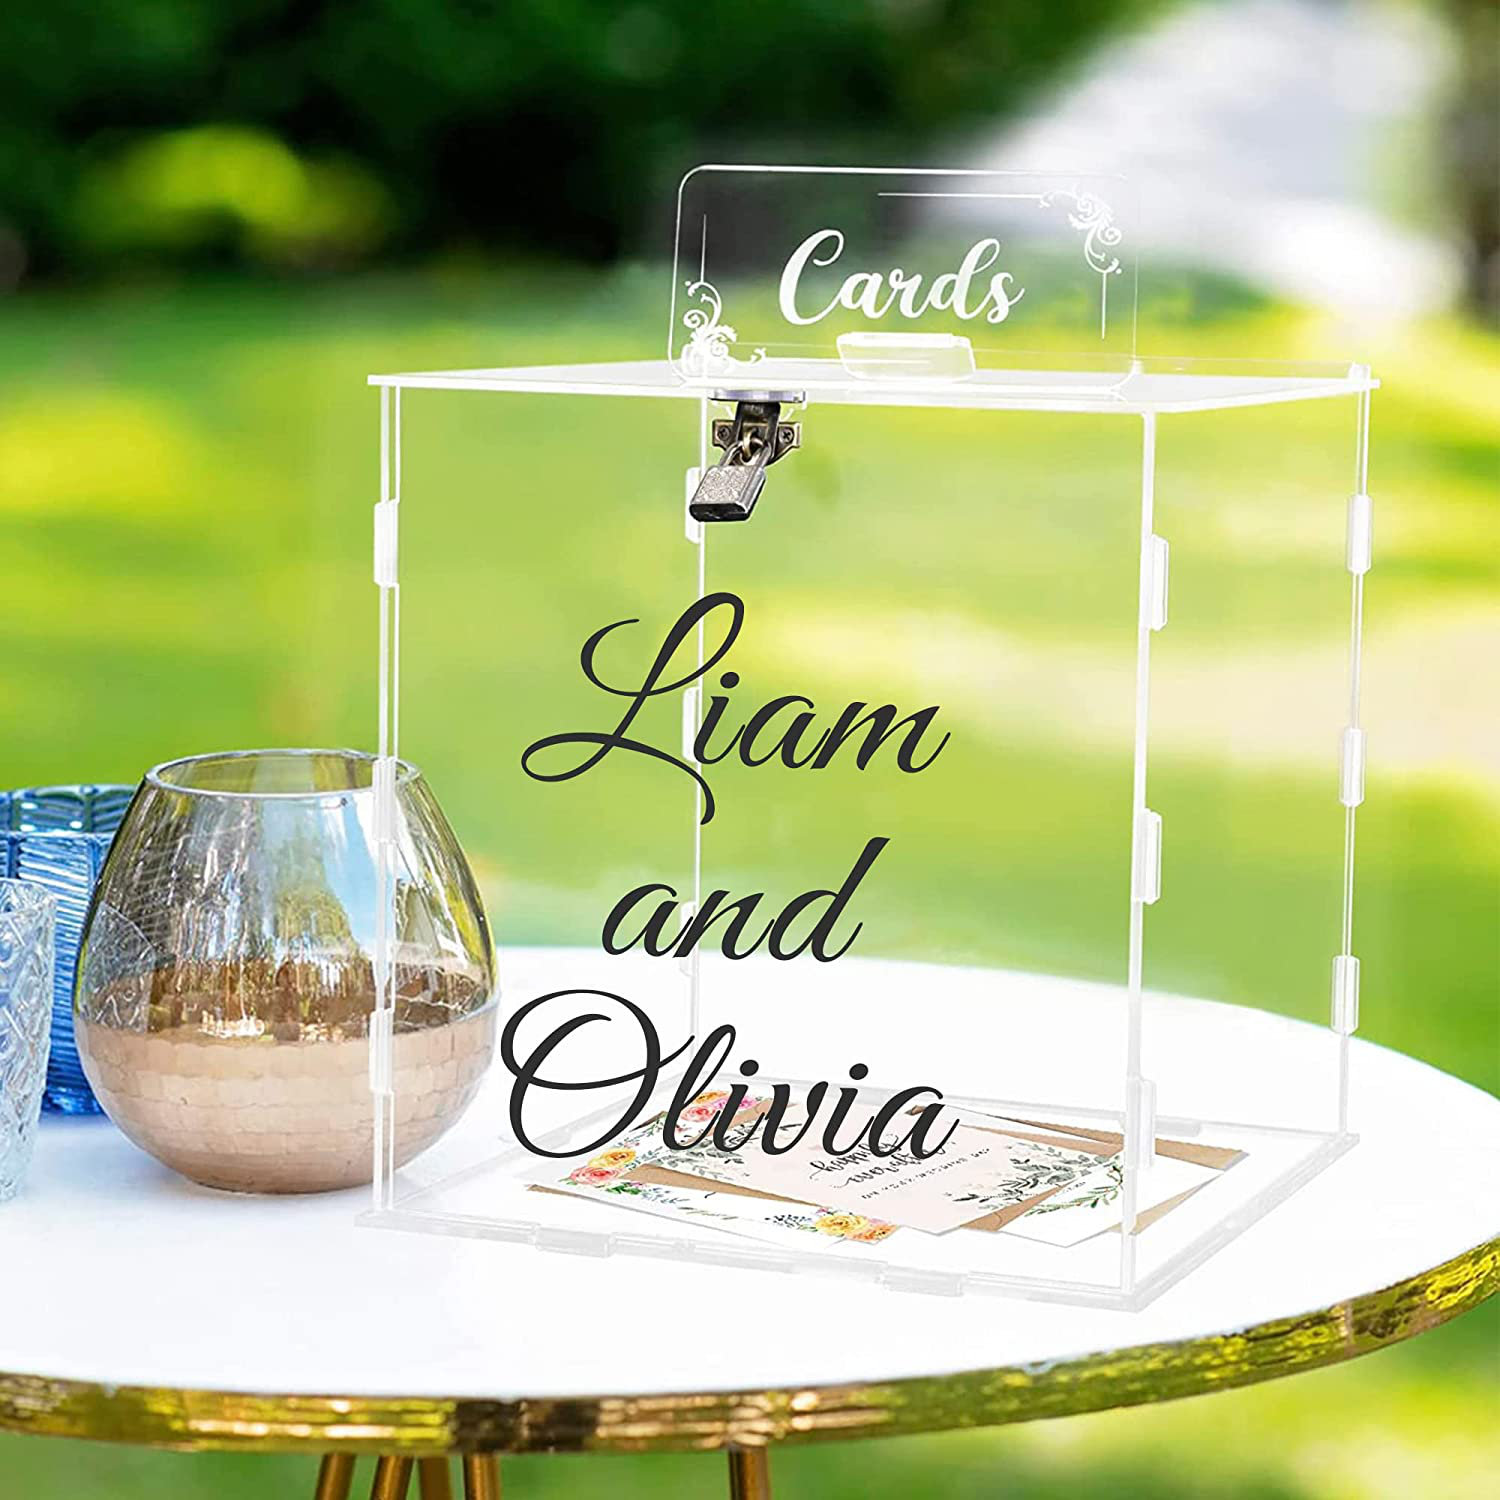 Clear Acrylic Wedding Card Box With Lock, Key & Thank You Sign Stand,  Reception Party Money Gift Card Box